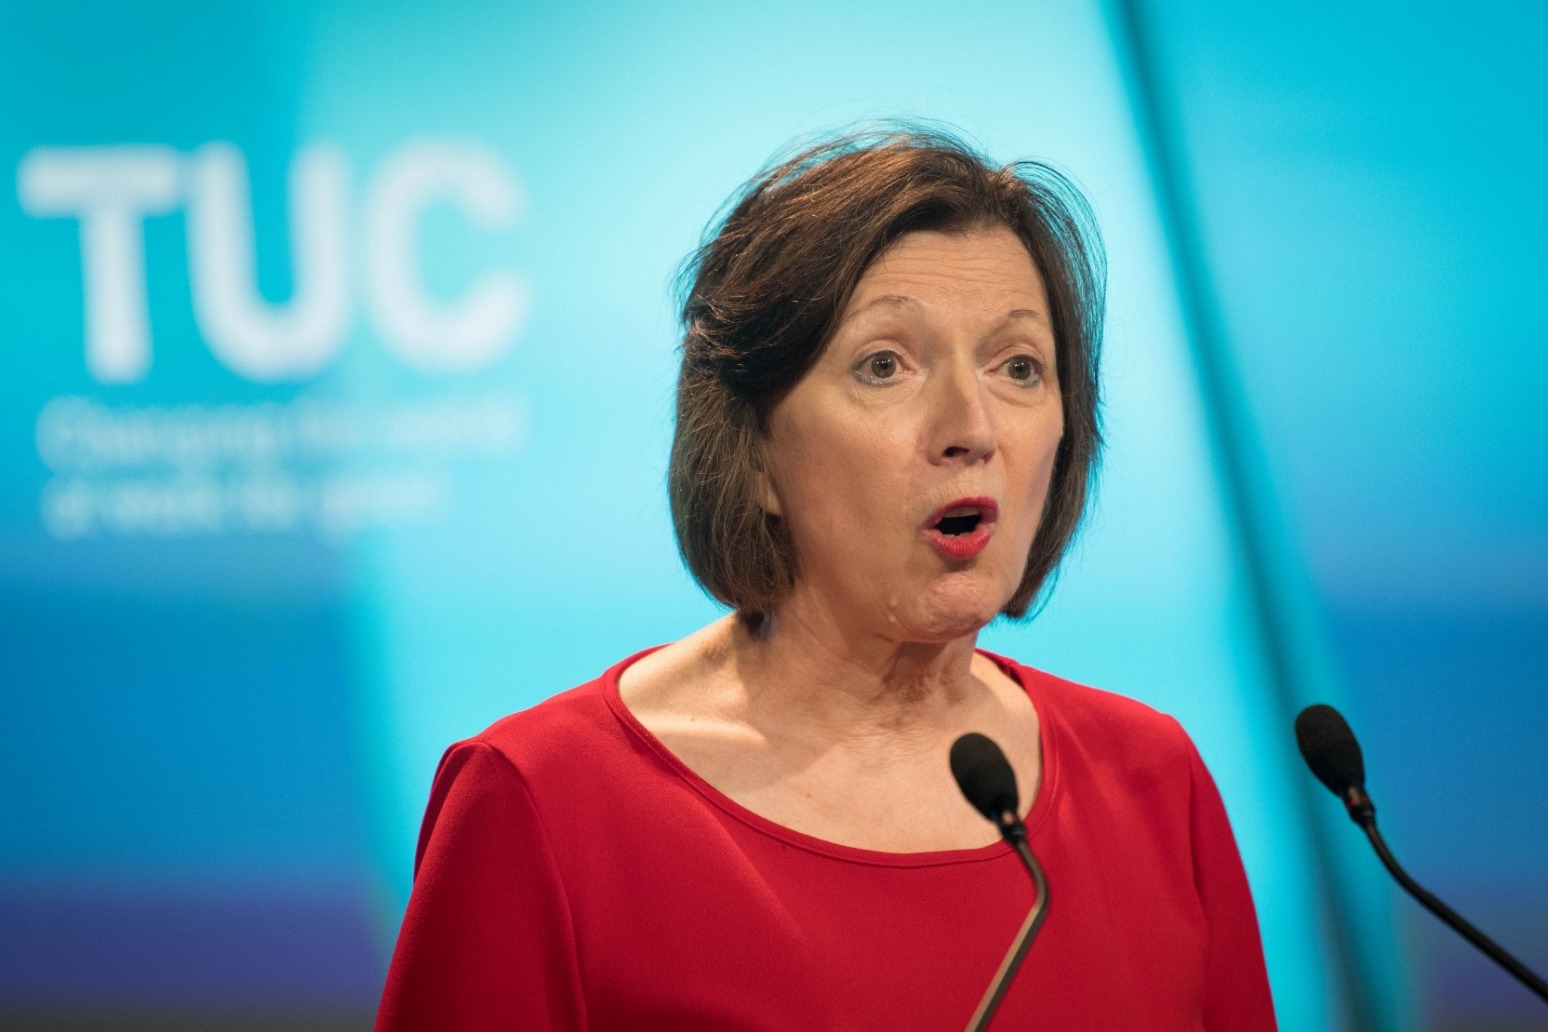 TUC warns new Prime Minister not to weaken workers’ rights 